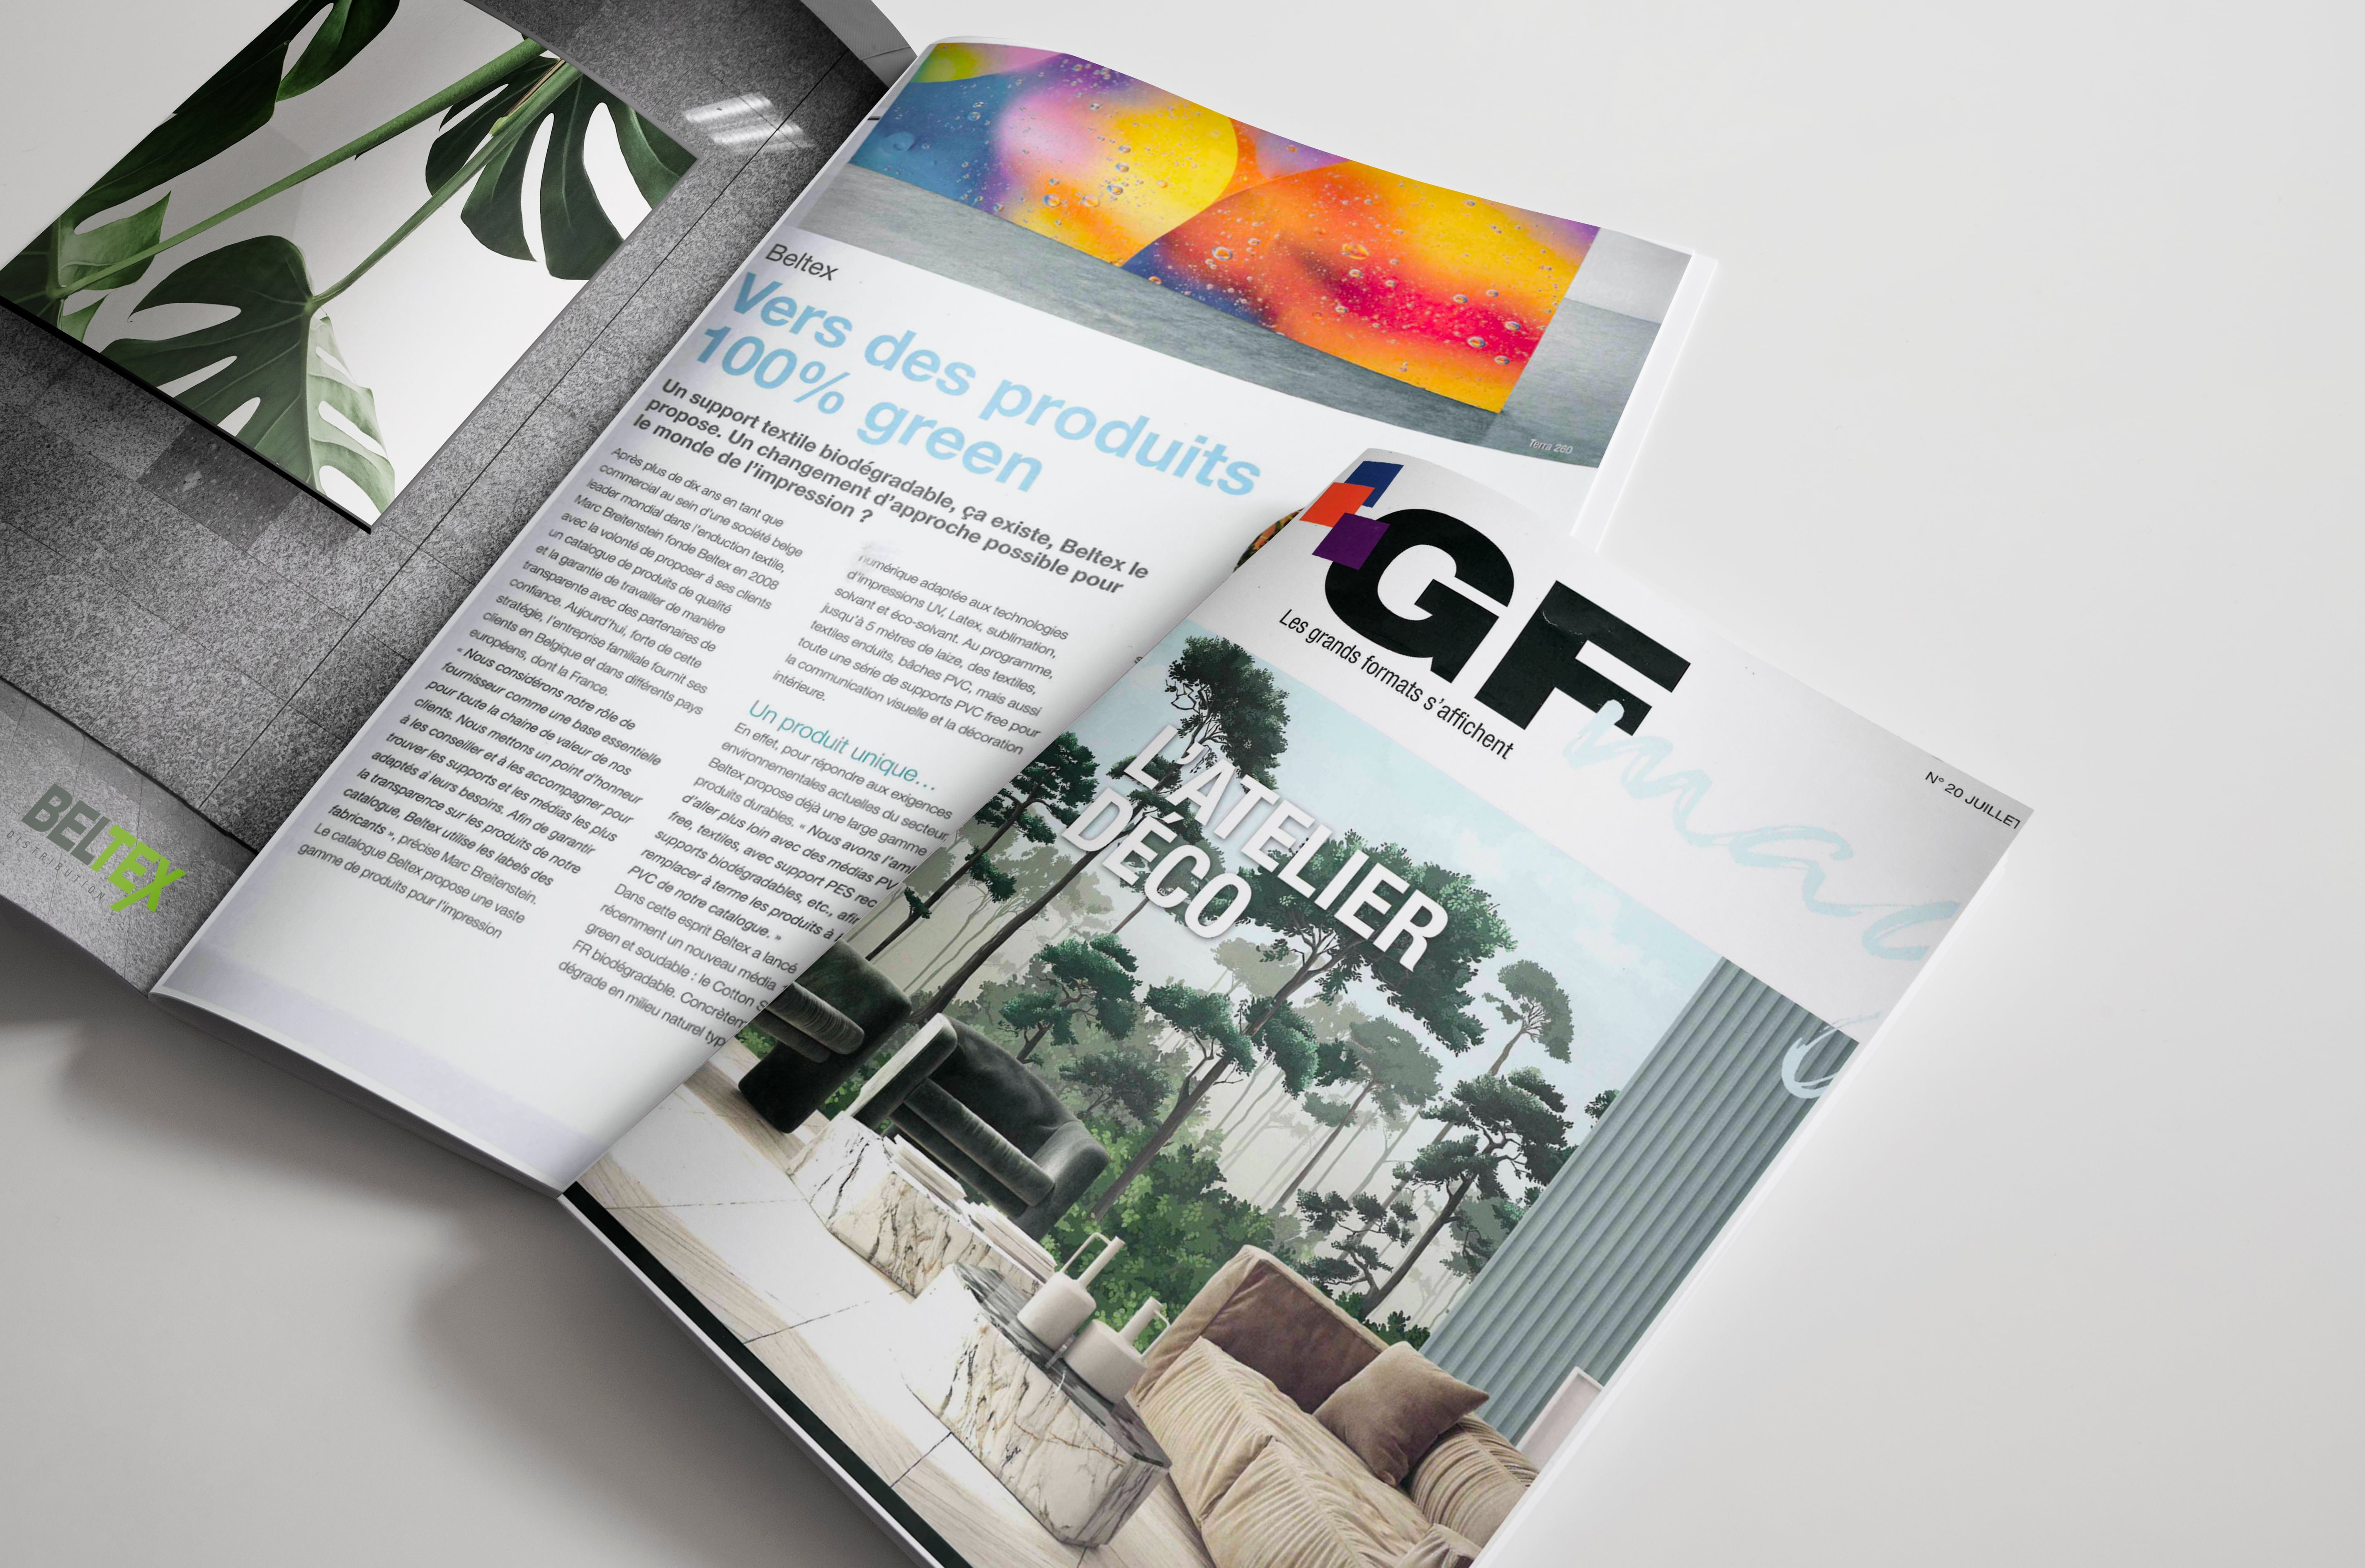 The GF mag talks about us: Towards 100% green products